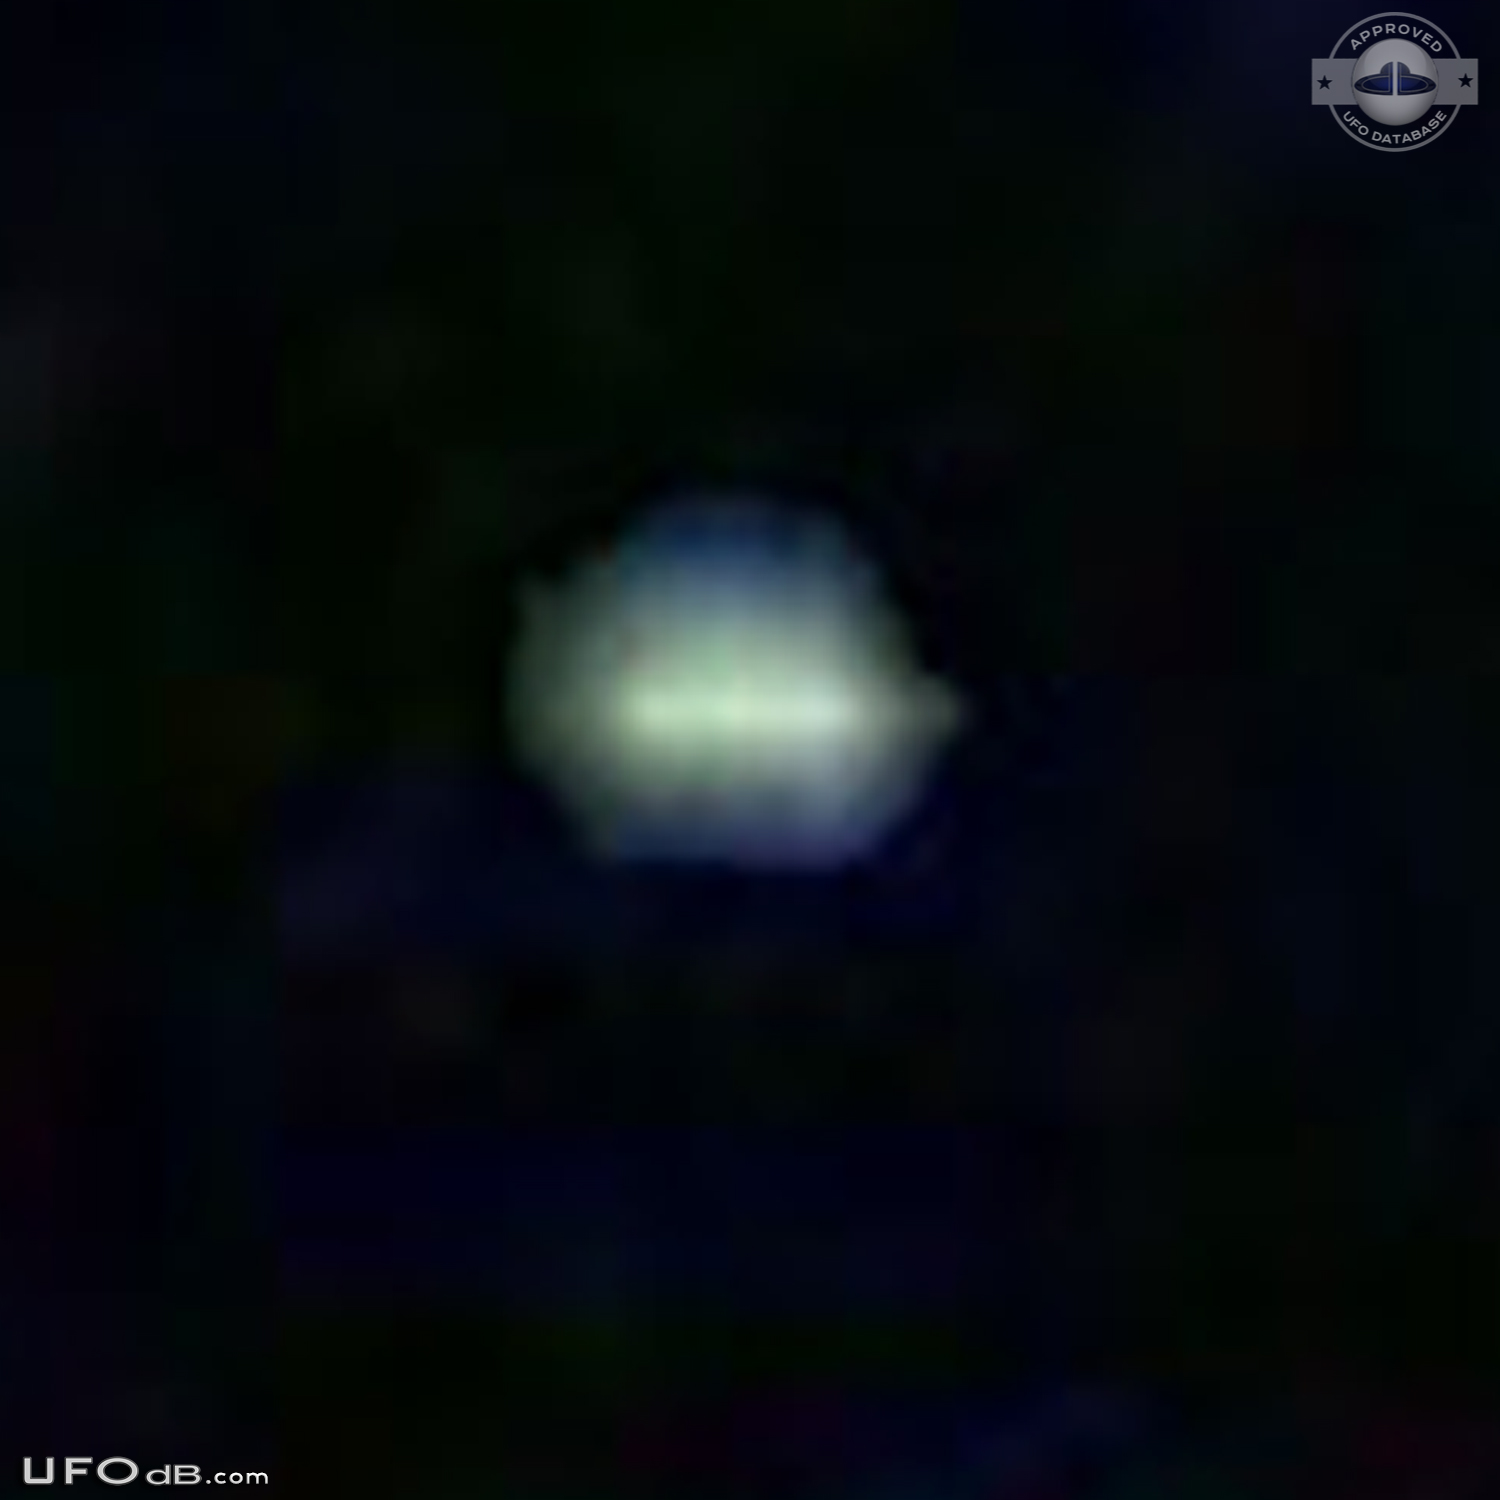 UFO was there for two hours over Barrie Ontario Canada in 2007 UFO Picture #646-4